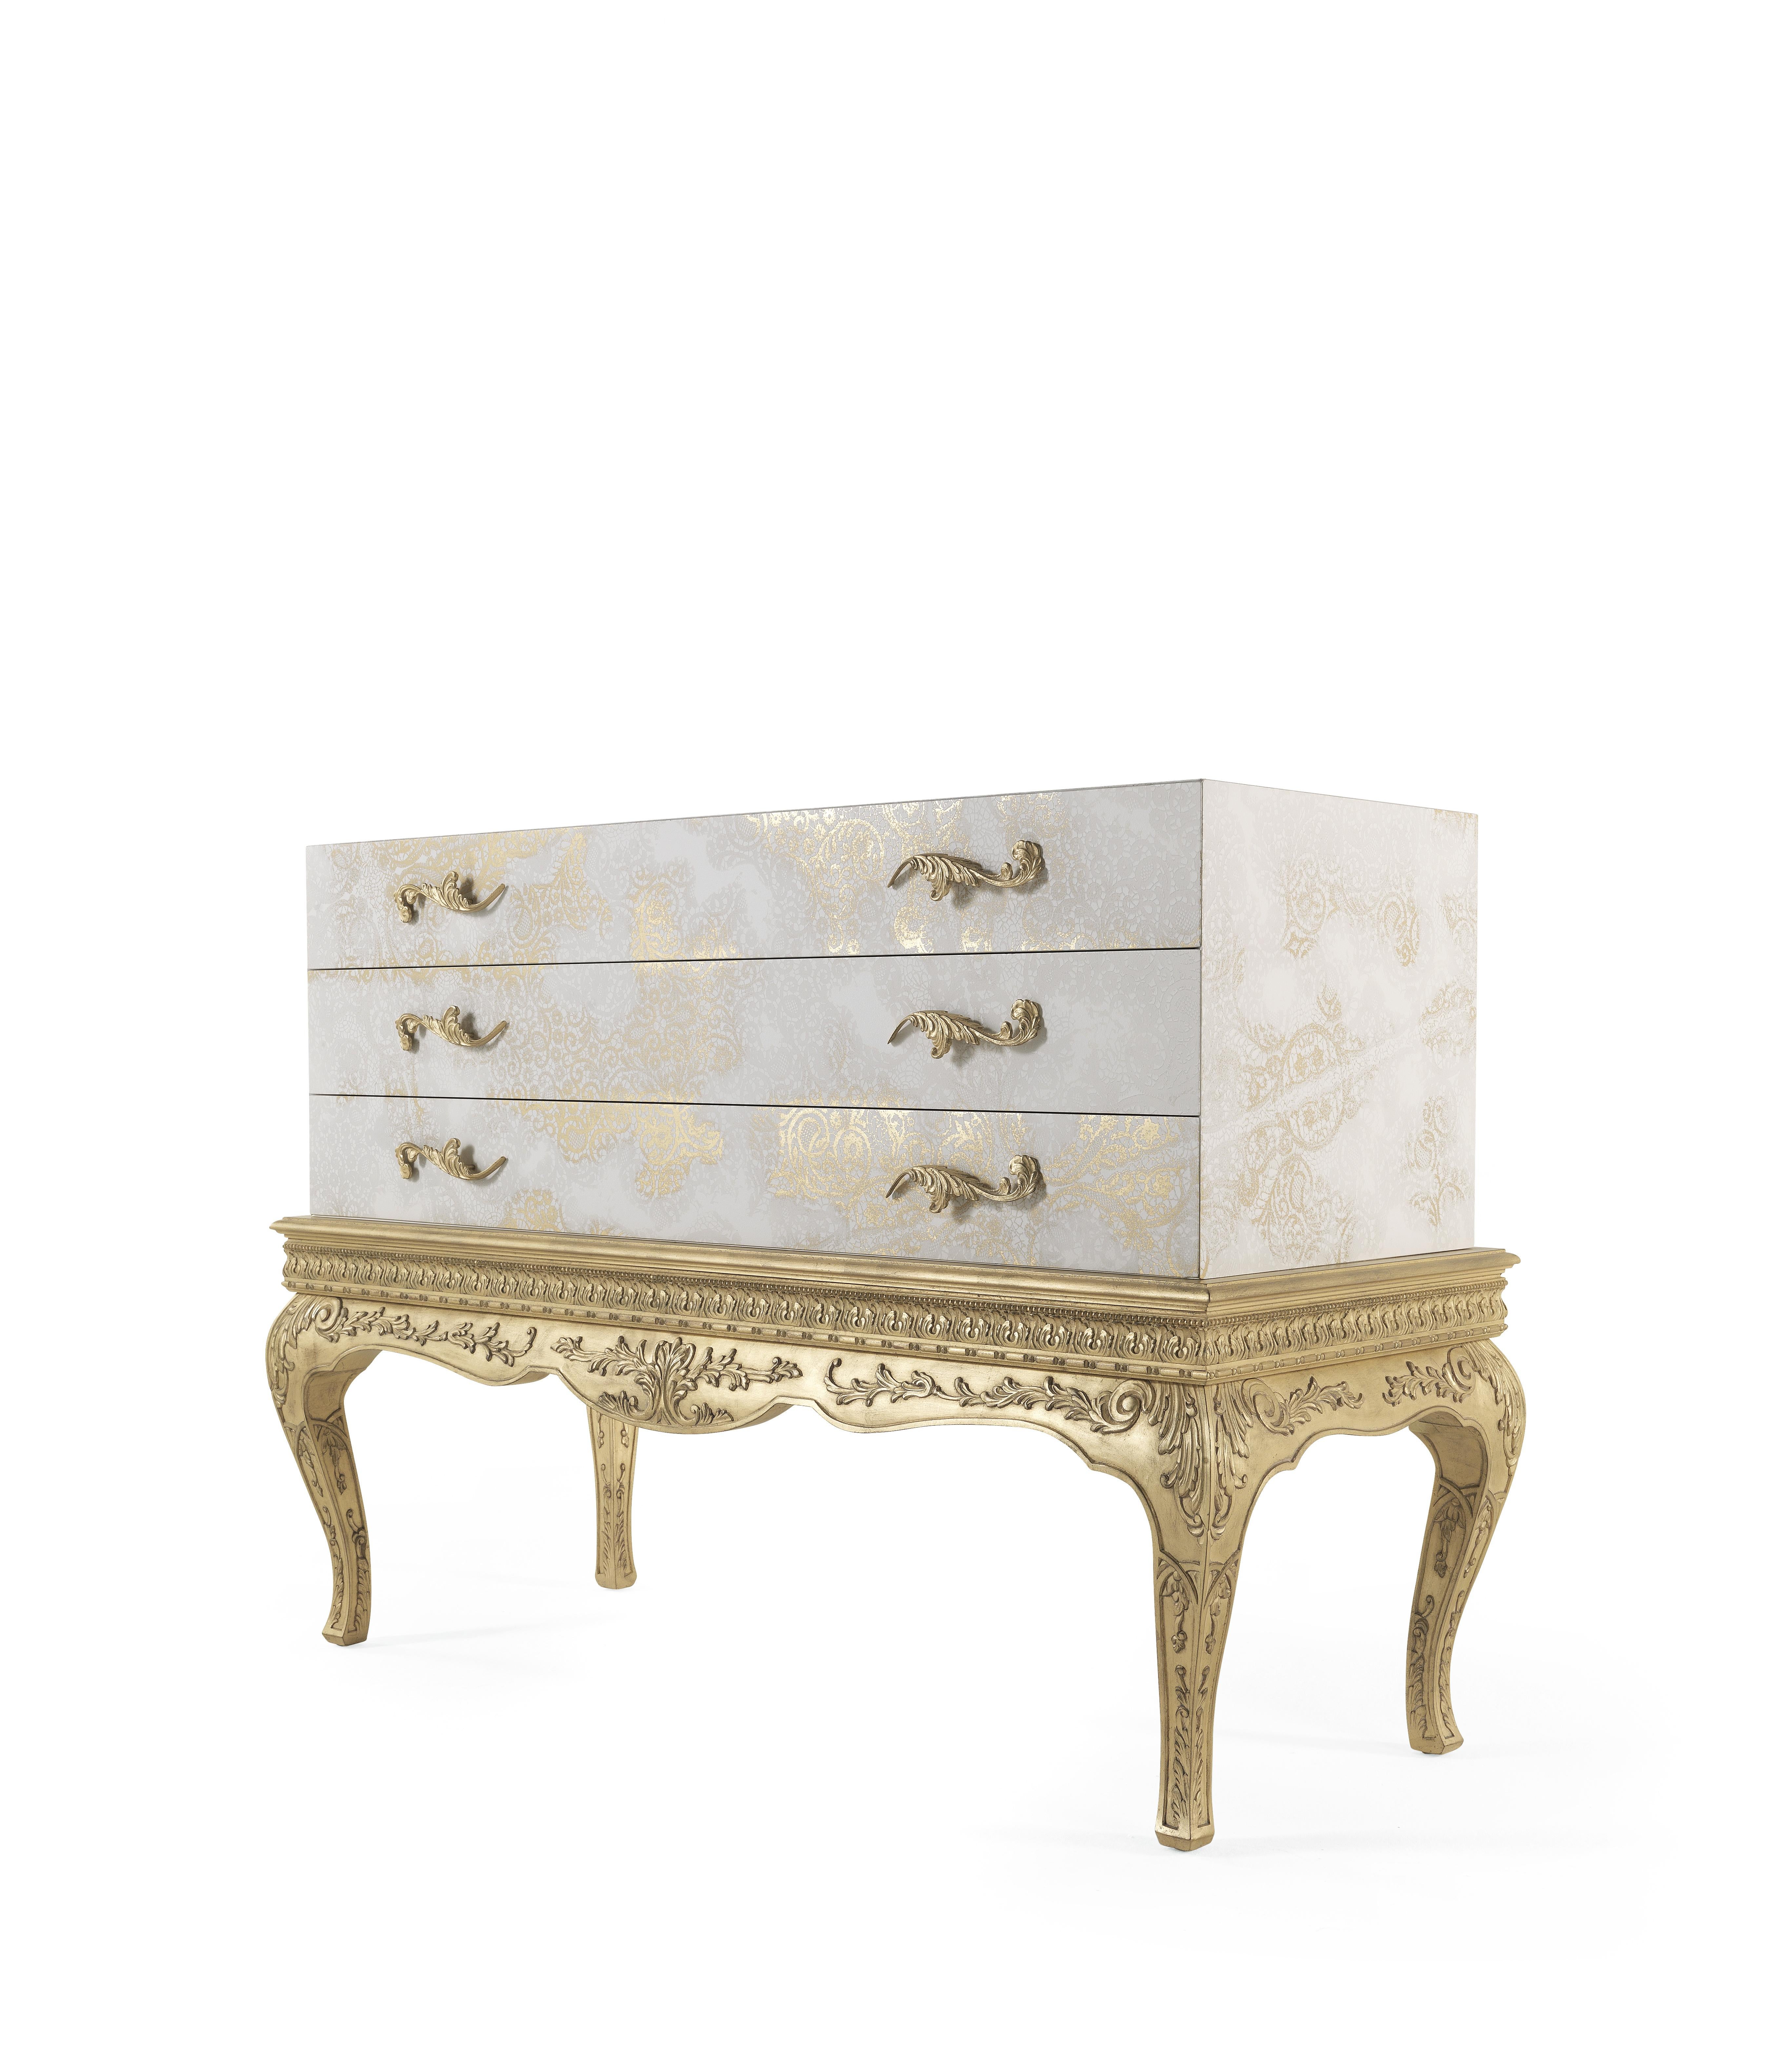 The chest of drawers of the Brocart line is a piece of furniture with a refined and luxurious charm. The base, with hand-carved legs and antique gold leaf finishing in pure classic style is combined with an upper part featuring a
more essential and